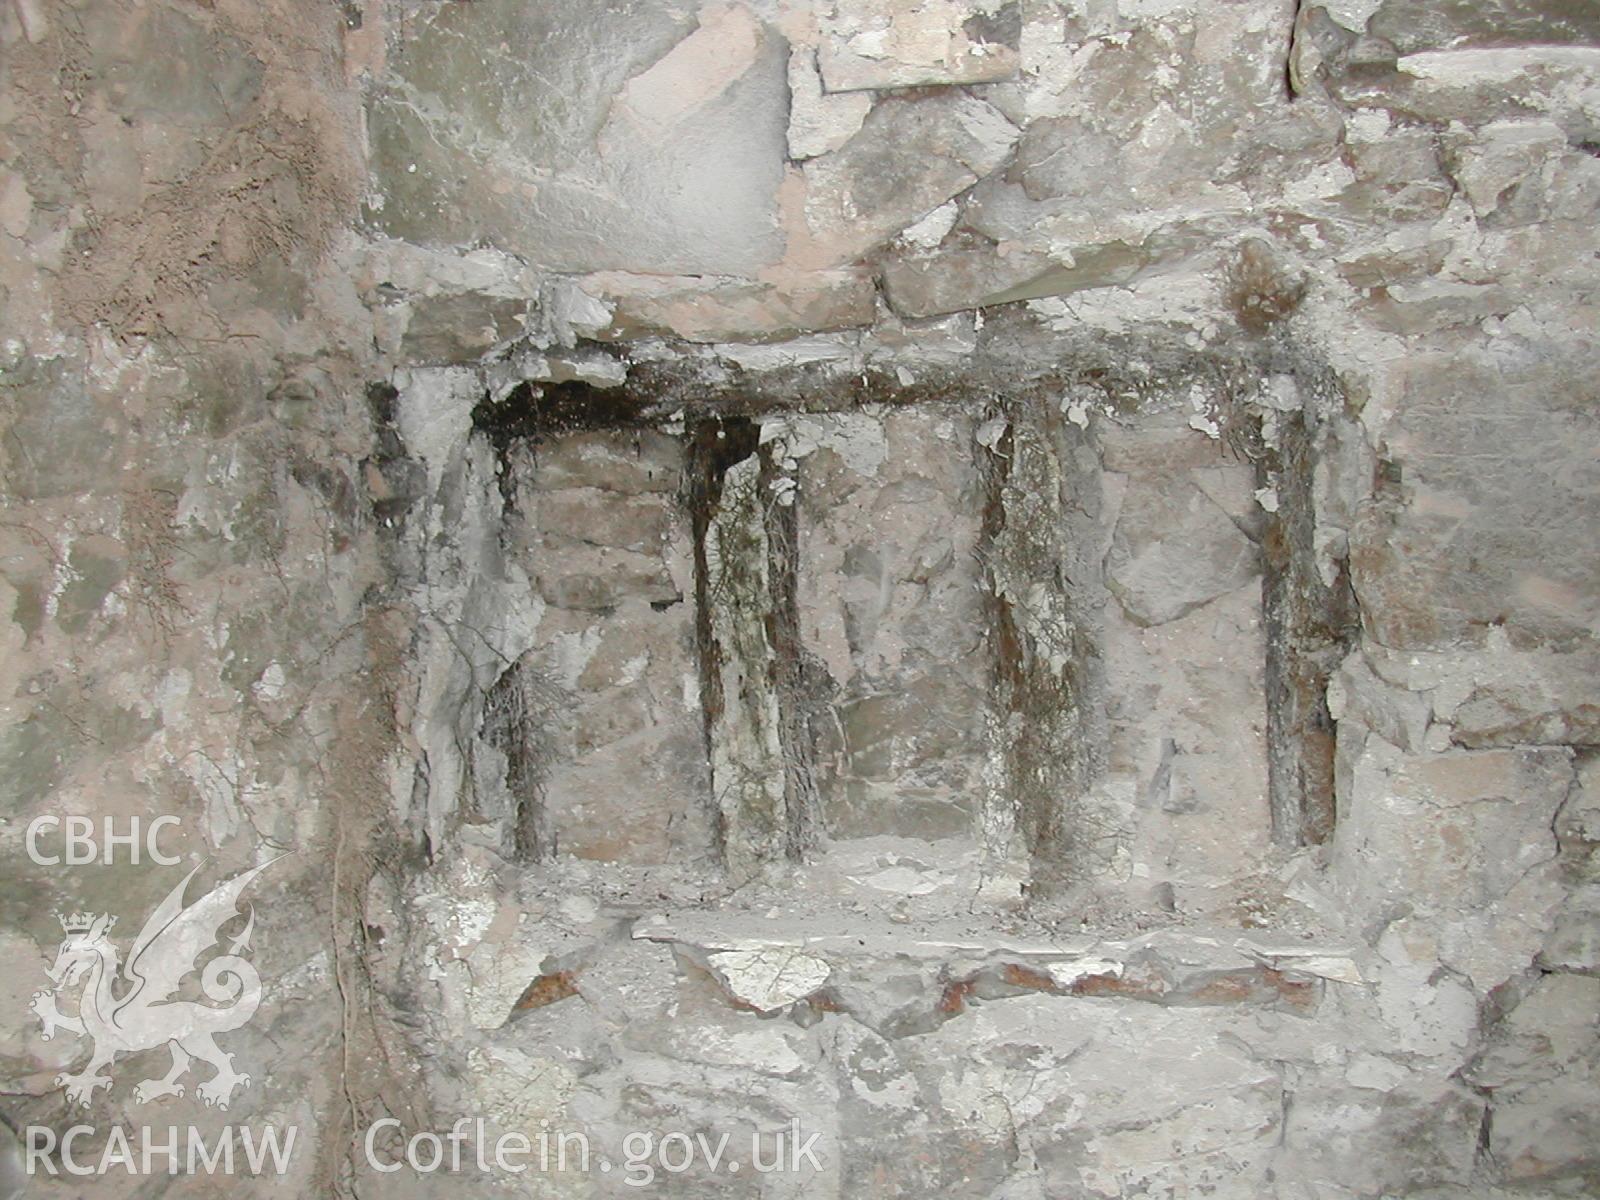 Colour photograph showing detailed interior view of presumed blocked-up window at Rosacre, Gronant, Prestatyn. Unknown date. Donated by the Conservation Department of Flintshire County Council, in advance of relocation to new offices.